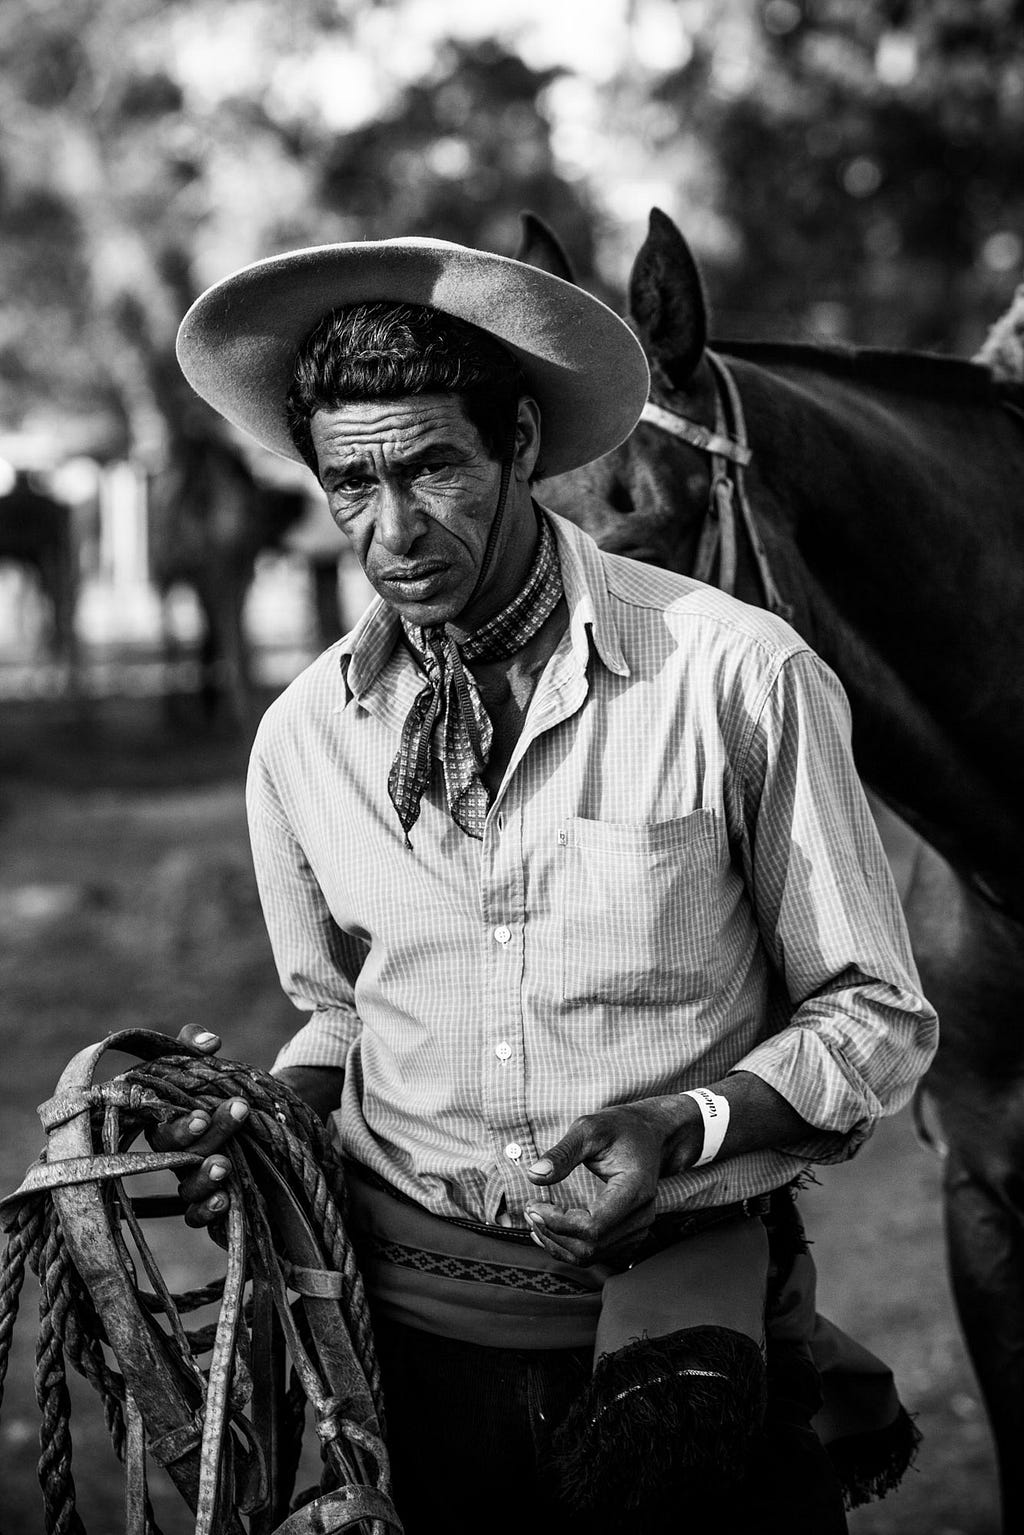 This gaucho made a new set of reins and lariat from cowhide for one of the regional criollas, or rodeo gatherings that draw competitors from every part of Uruguay on weekends. ©James Fisher 2017 All Rights Reserved